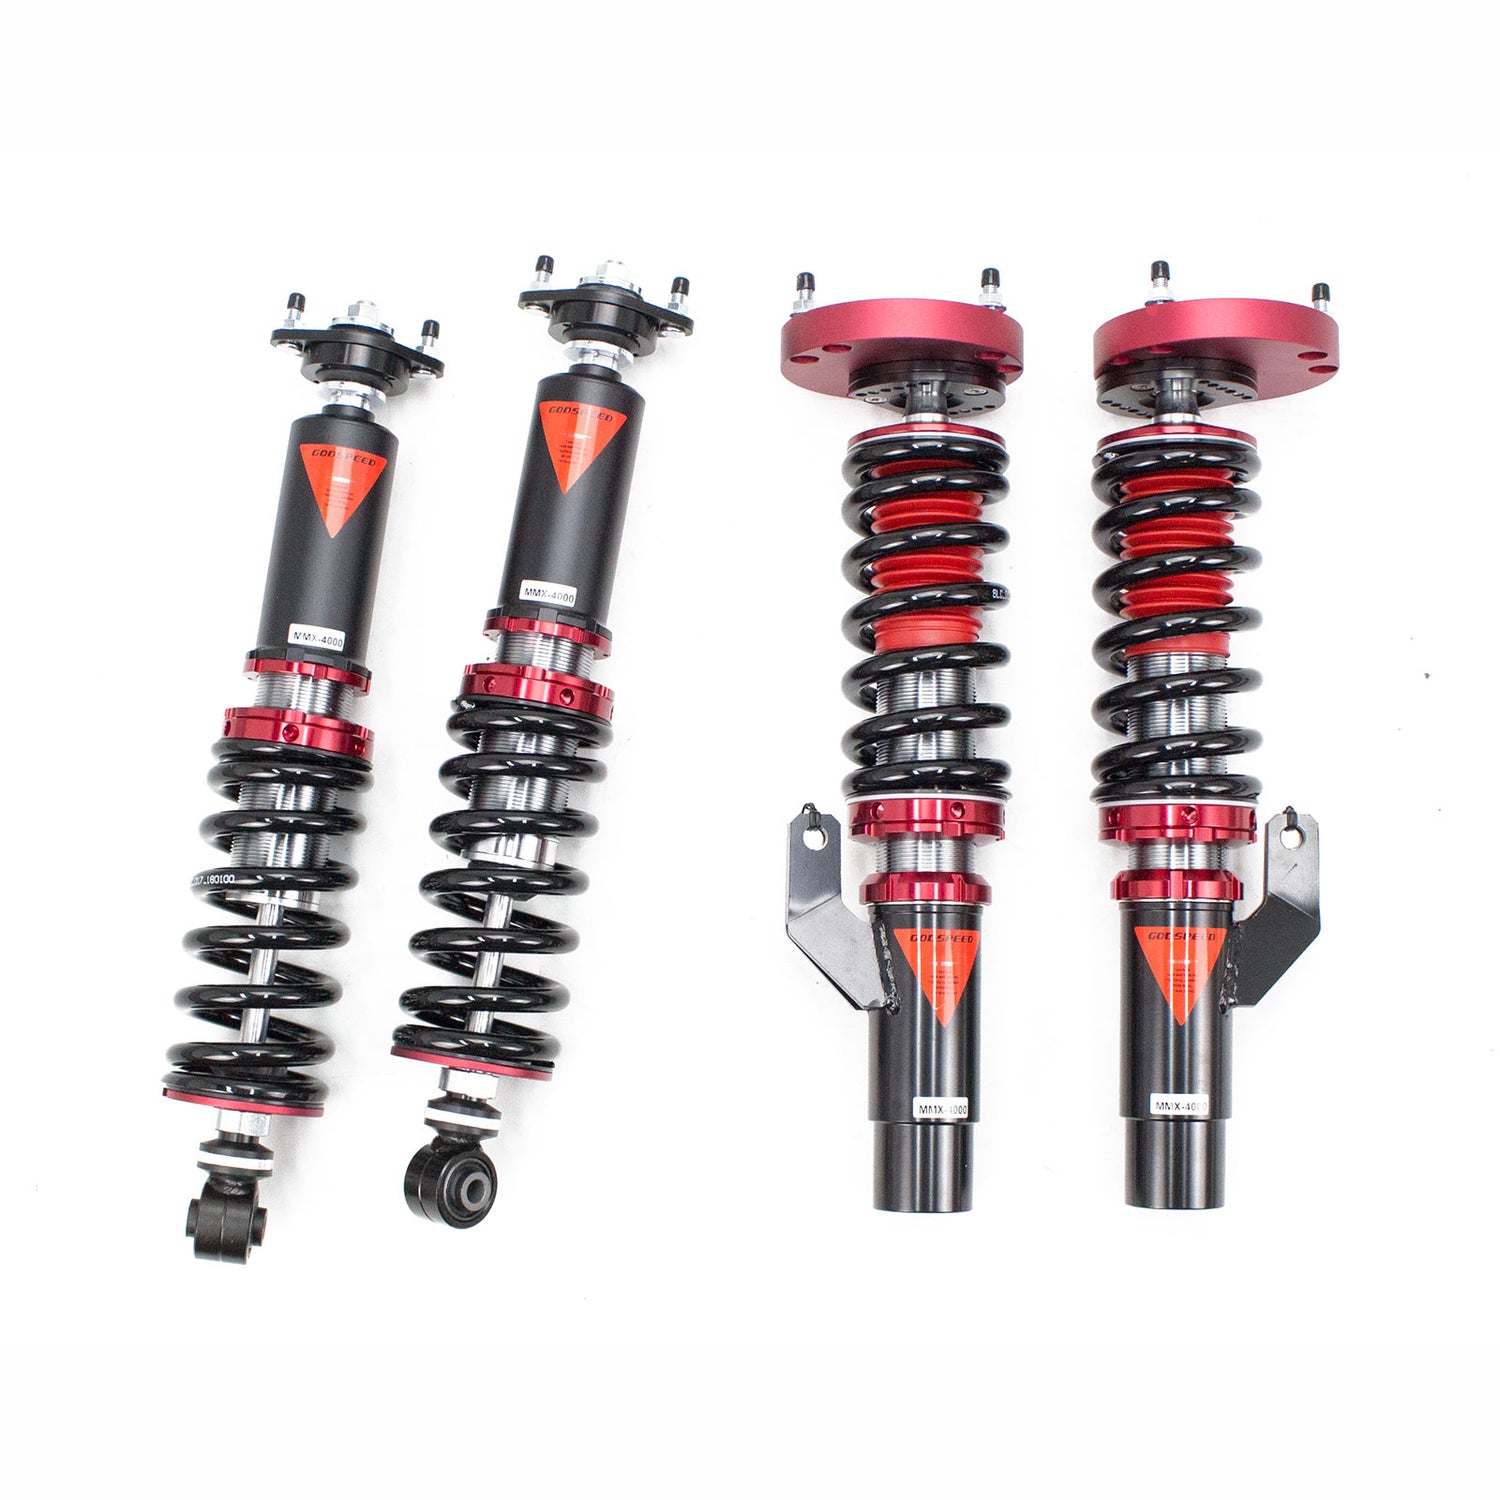 MMX40000 MAXX Coilovers Lowering Kit, Fully Adjustable, Ride Height, 40 Clicks Rebound Settings